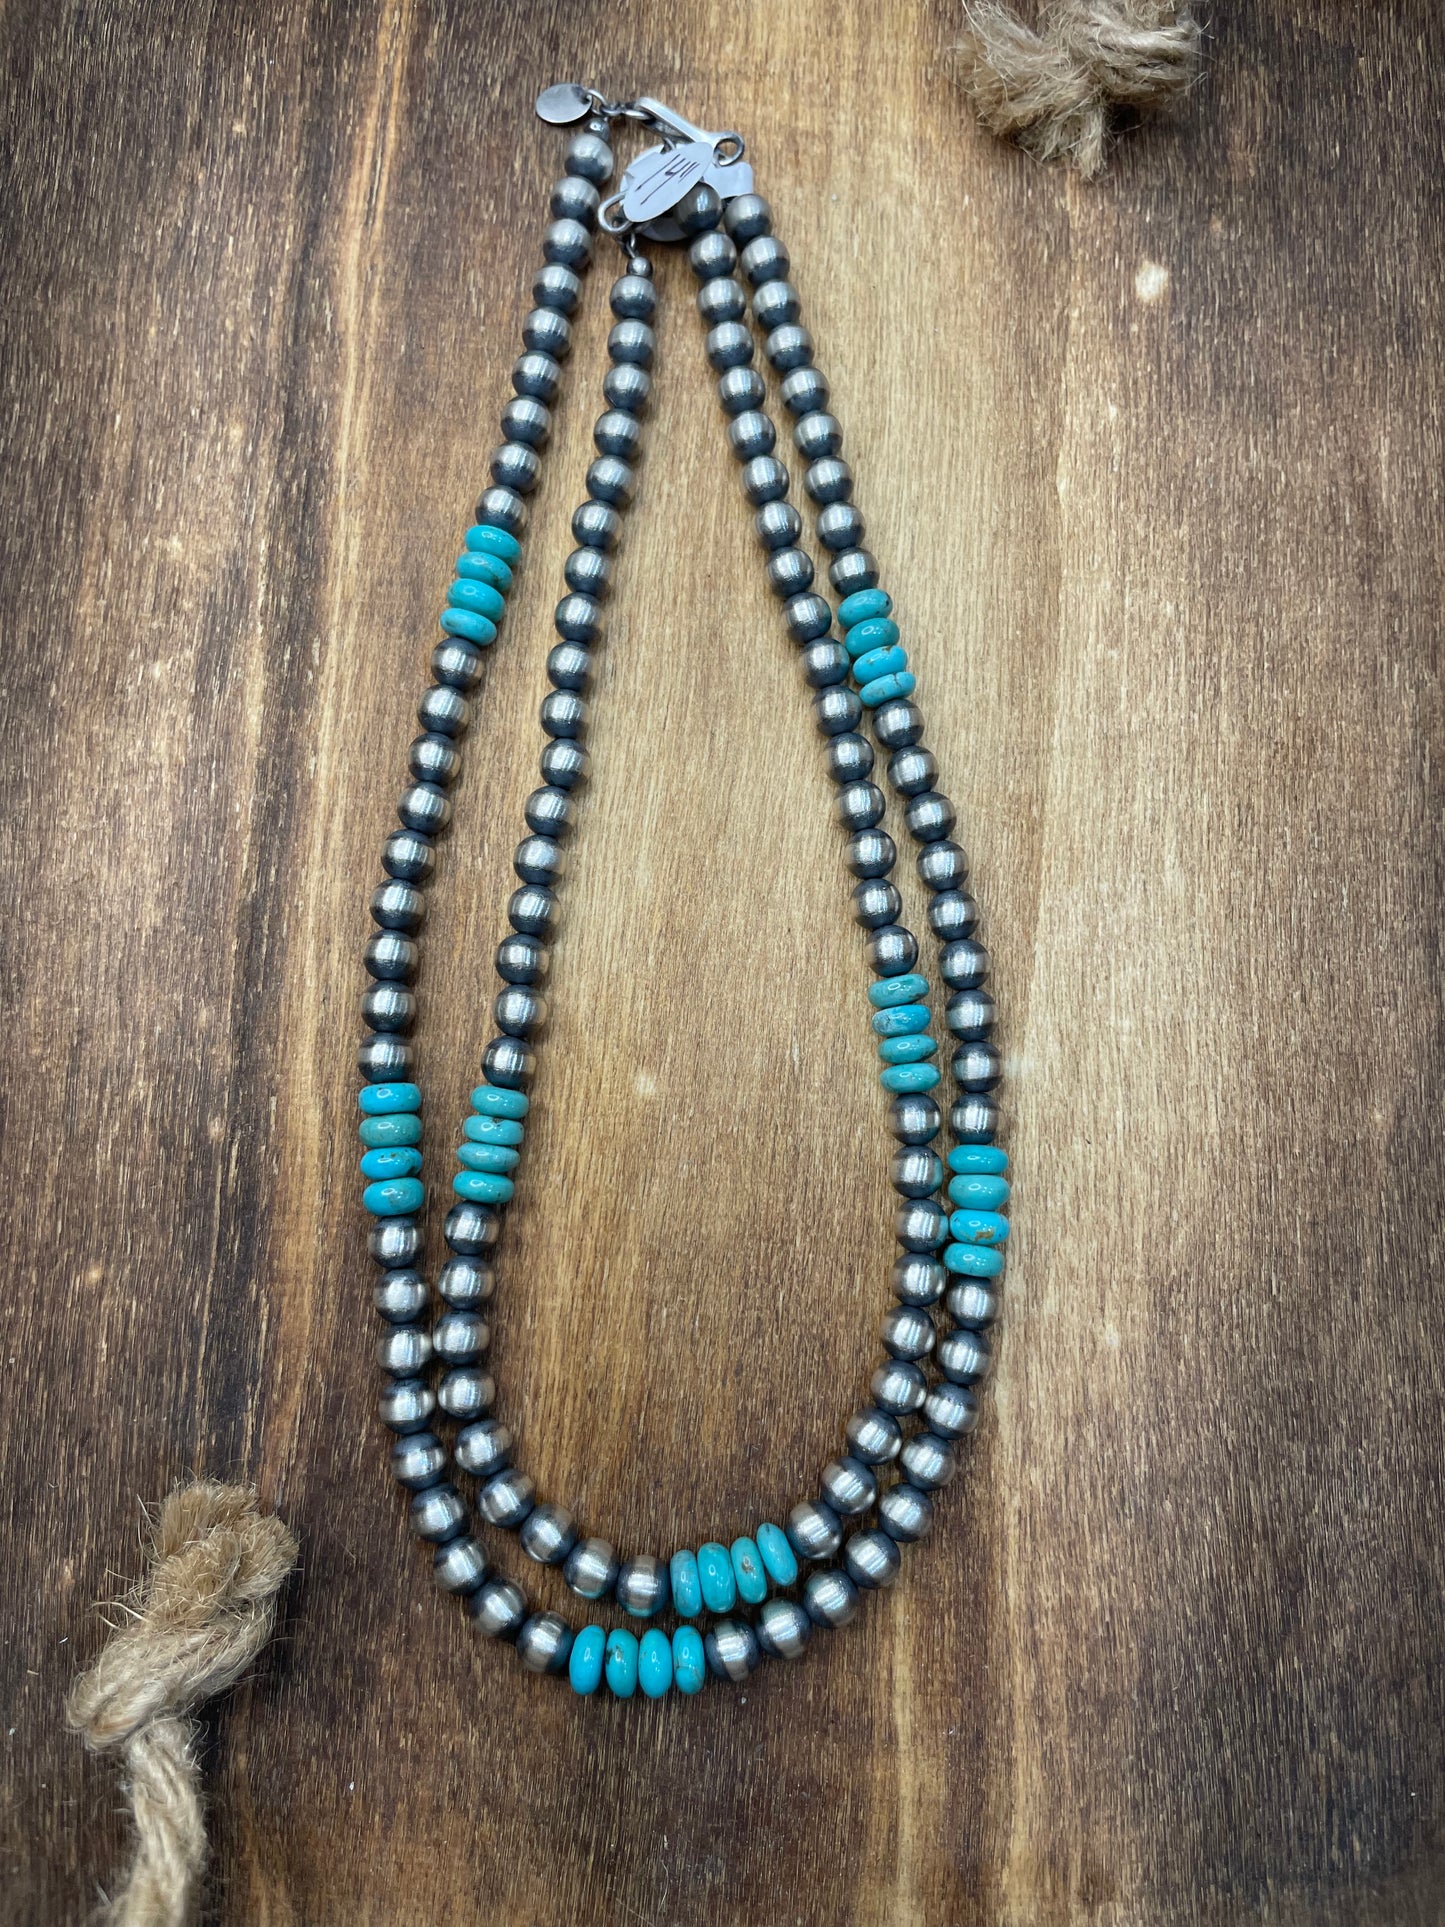 16” rondell Turquoise with 6mm Navajo Pearls Necklace